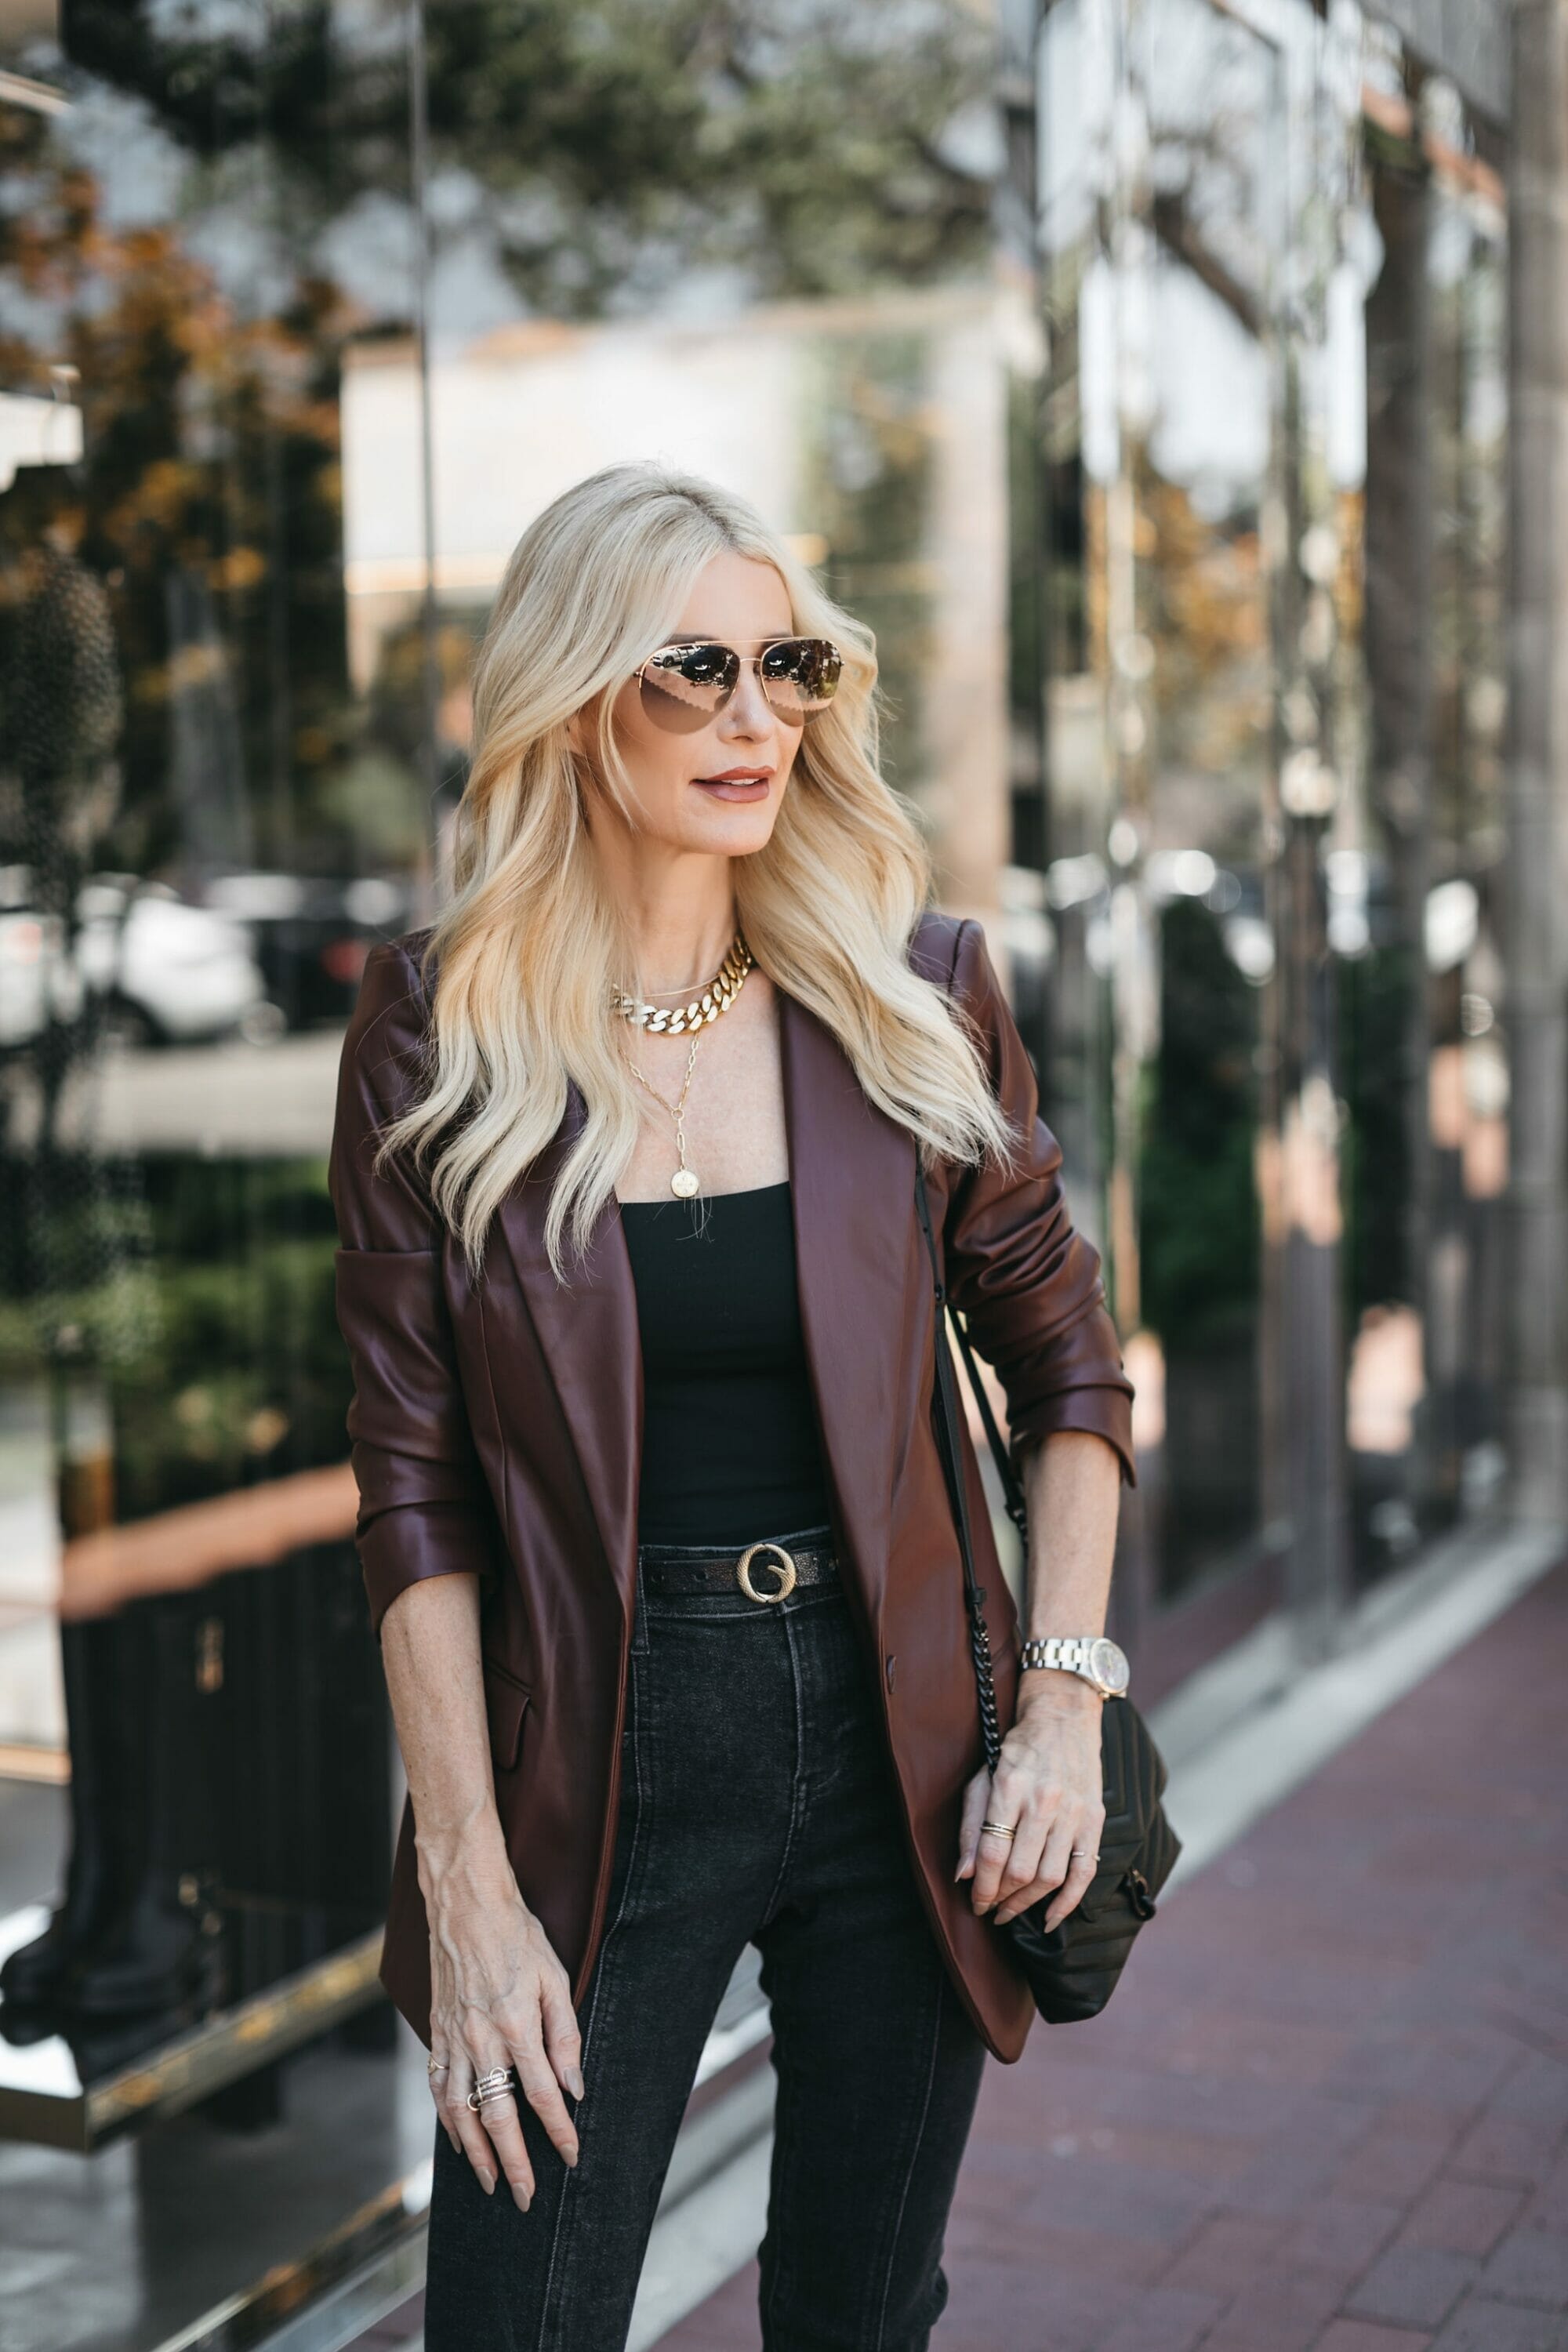 Over 40 fashion stylist from Dallas wearing a brown leather blazer with black faded jeans as one of 7 chic looks from Express